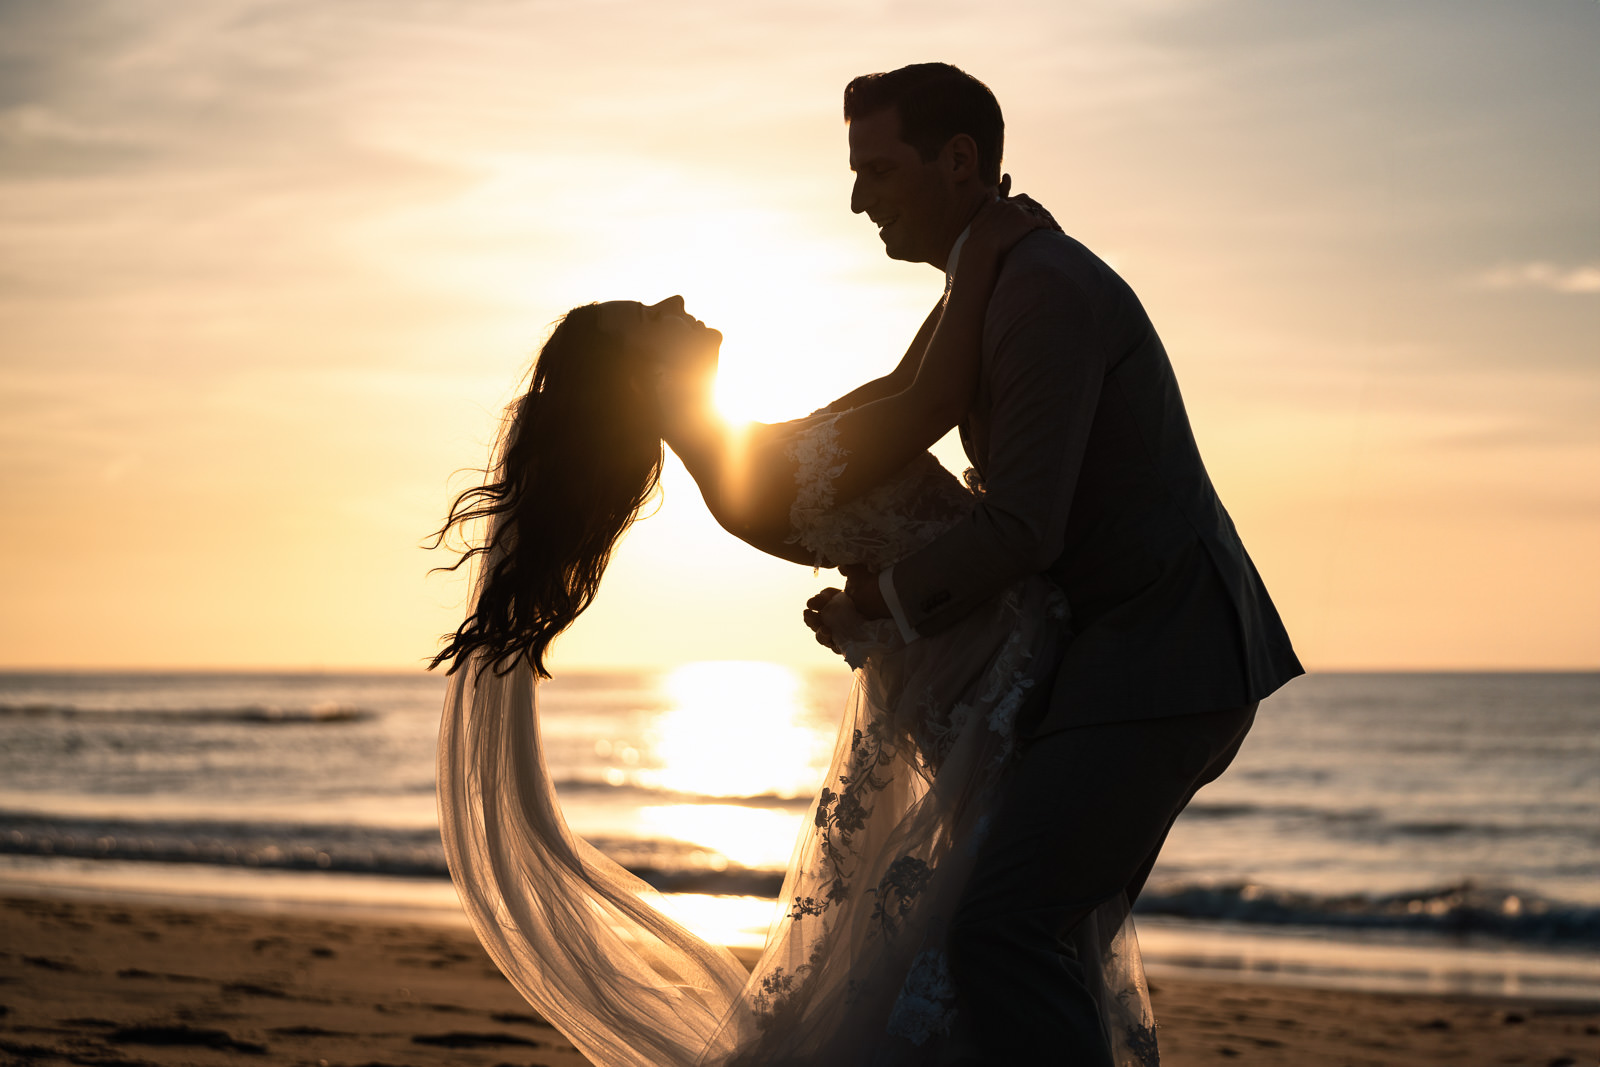 Bride and groom fun silhouette during beach wedding sunset